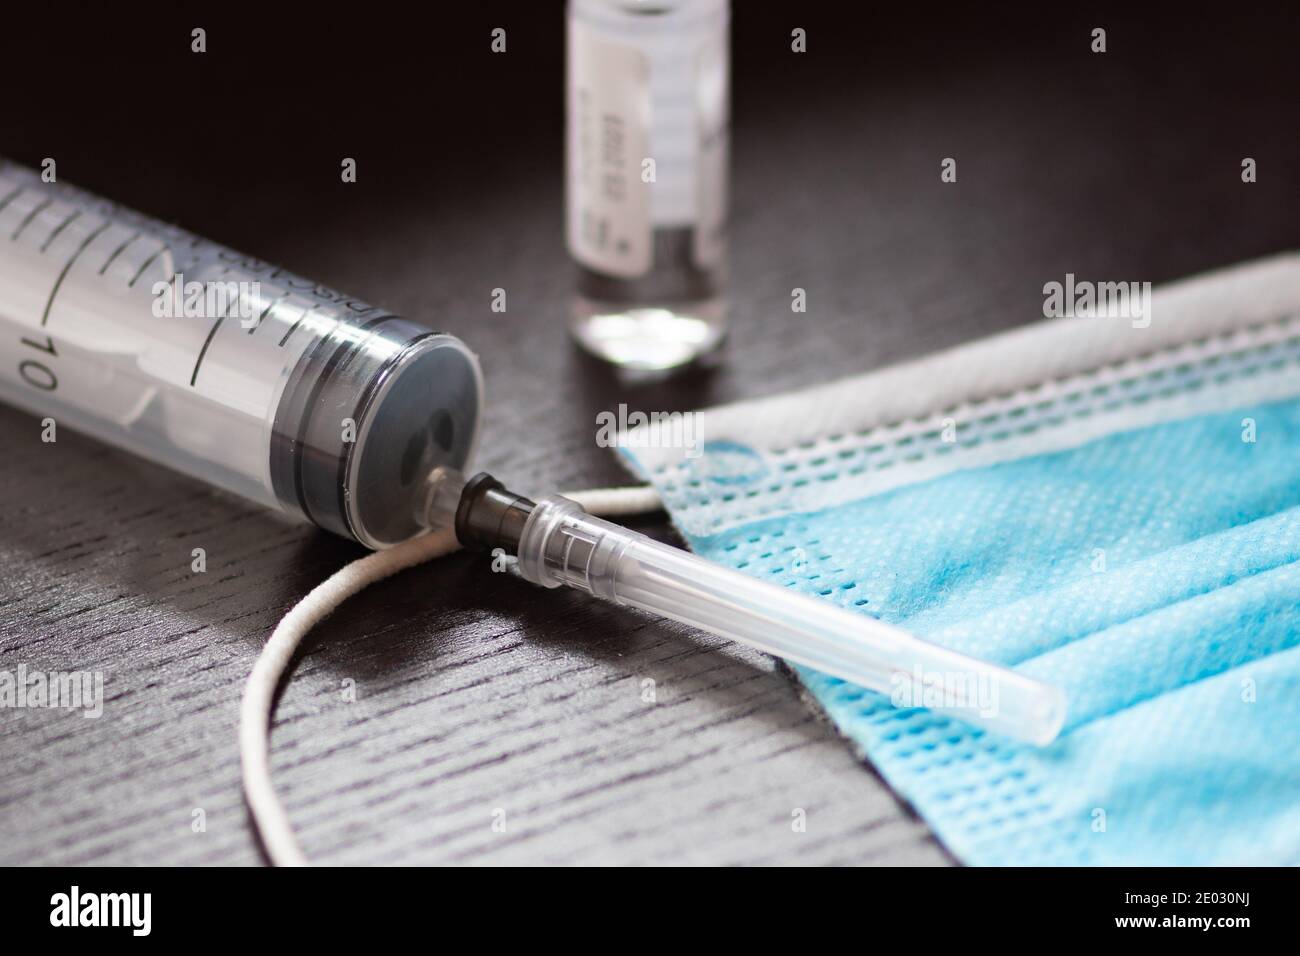 Syringe, vial and surgical face mask on a black table. Covid or Coronavirus vaccine background Stock Photo